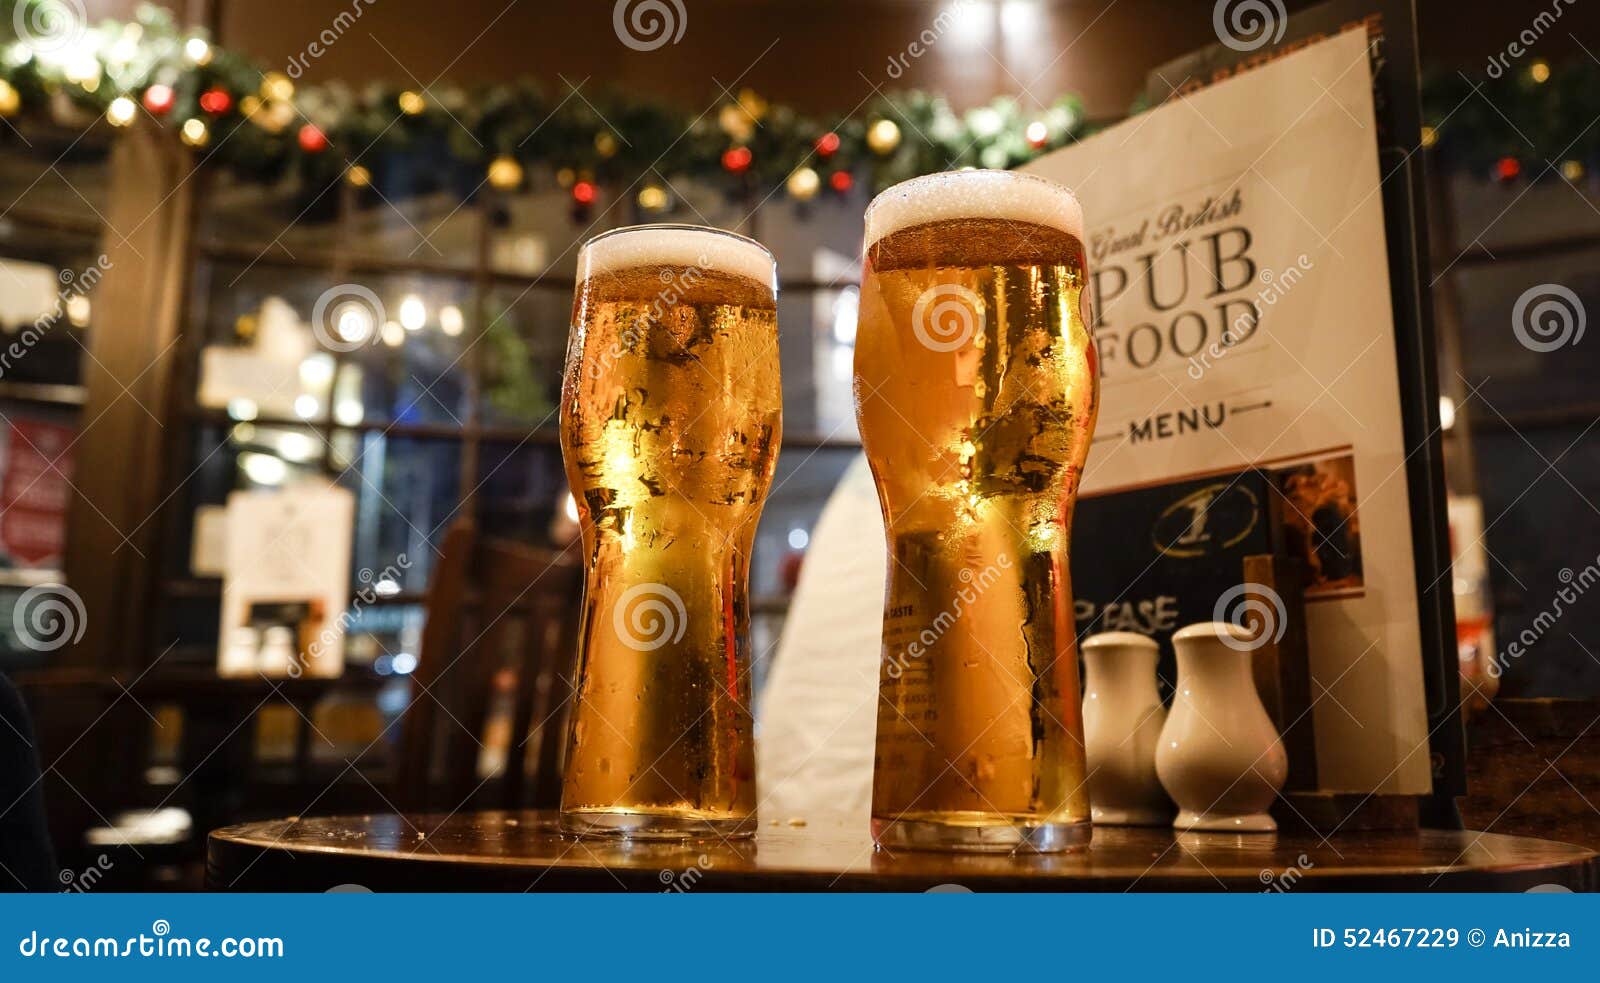 glass of beers on a local pub